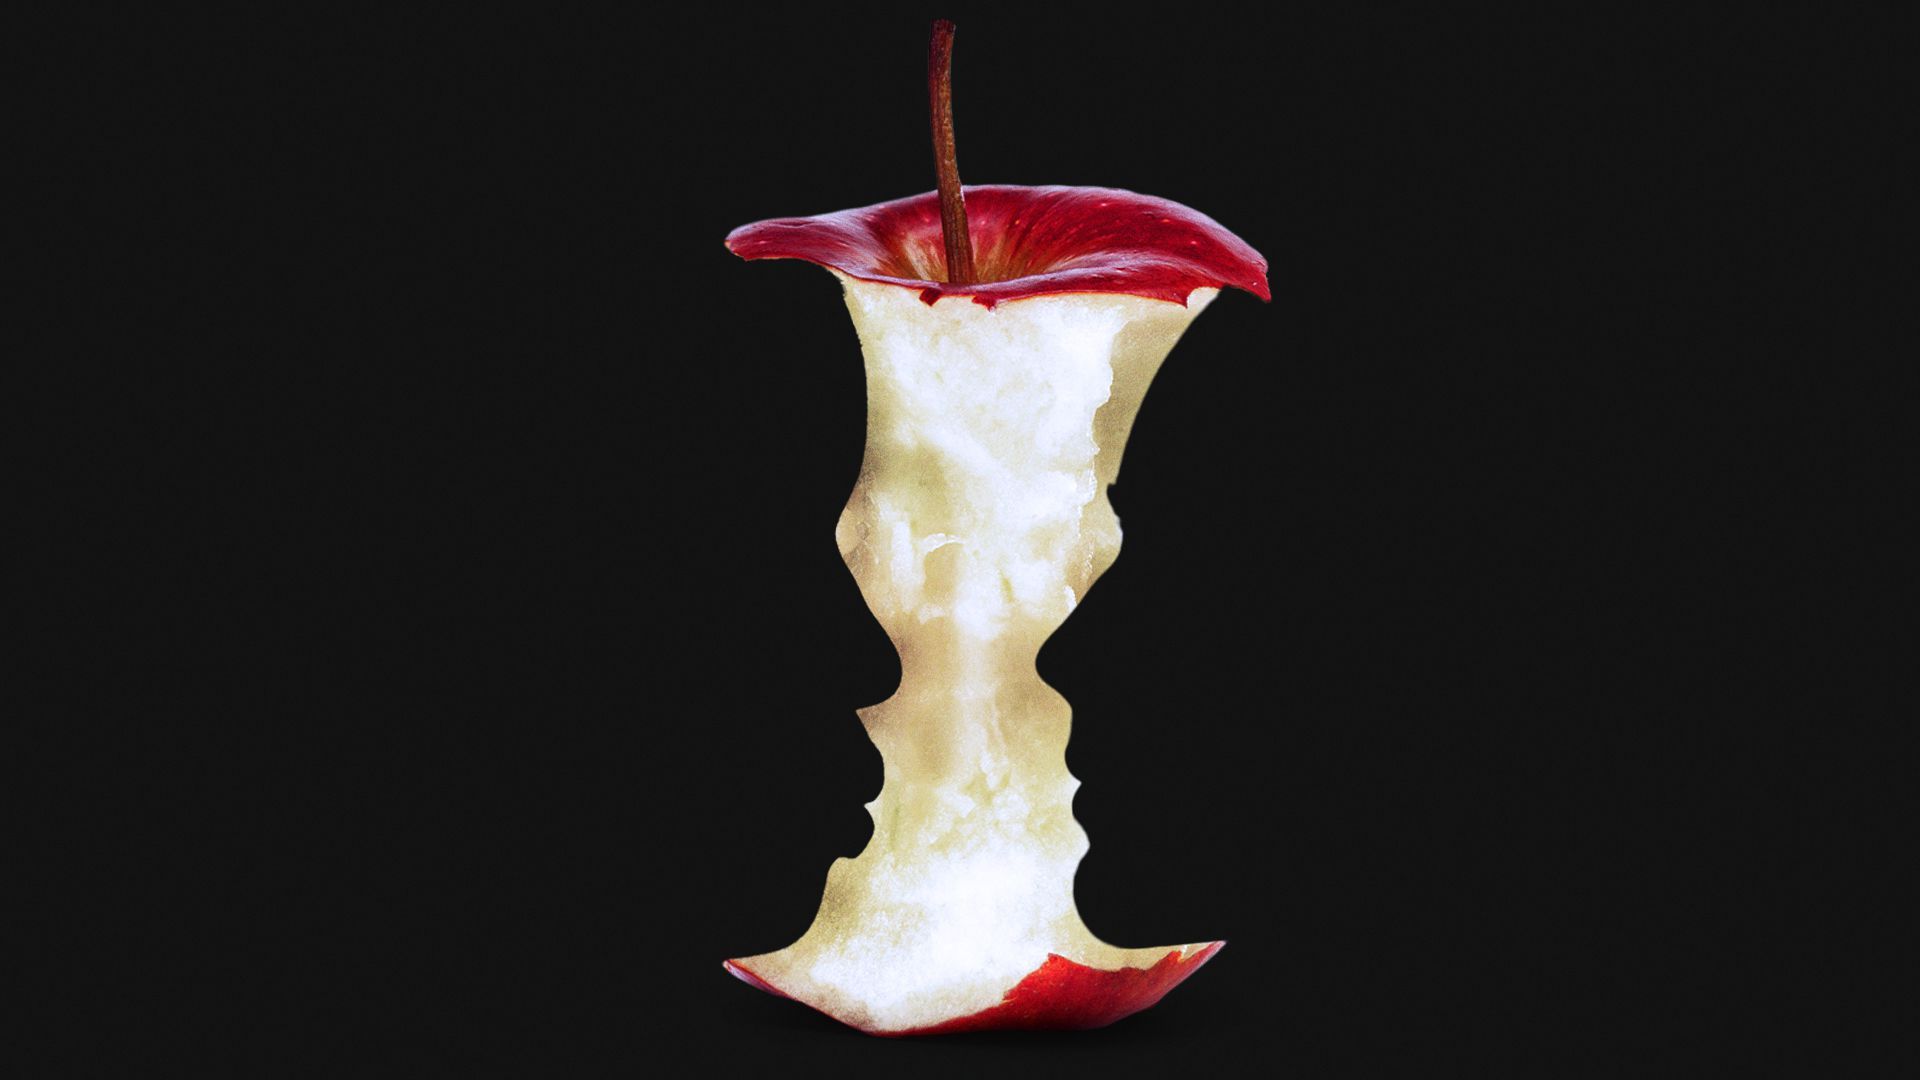 An apple core with a Black student and a white student silhouetted on each side.